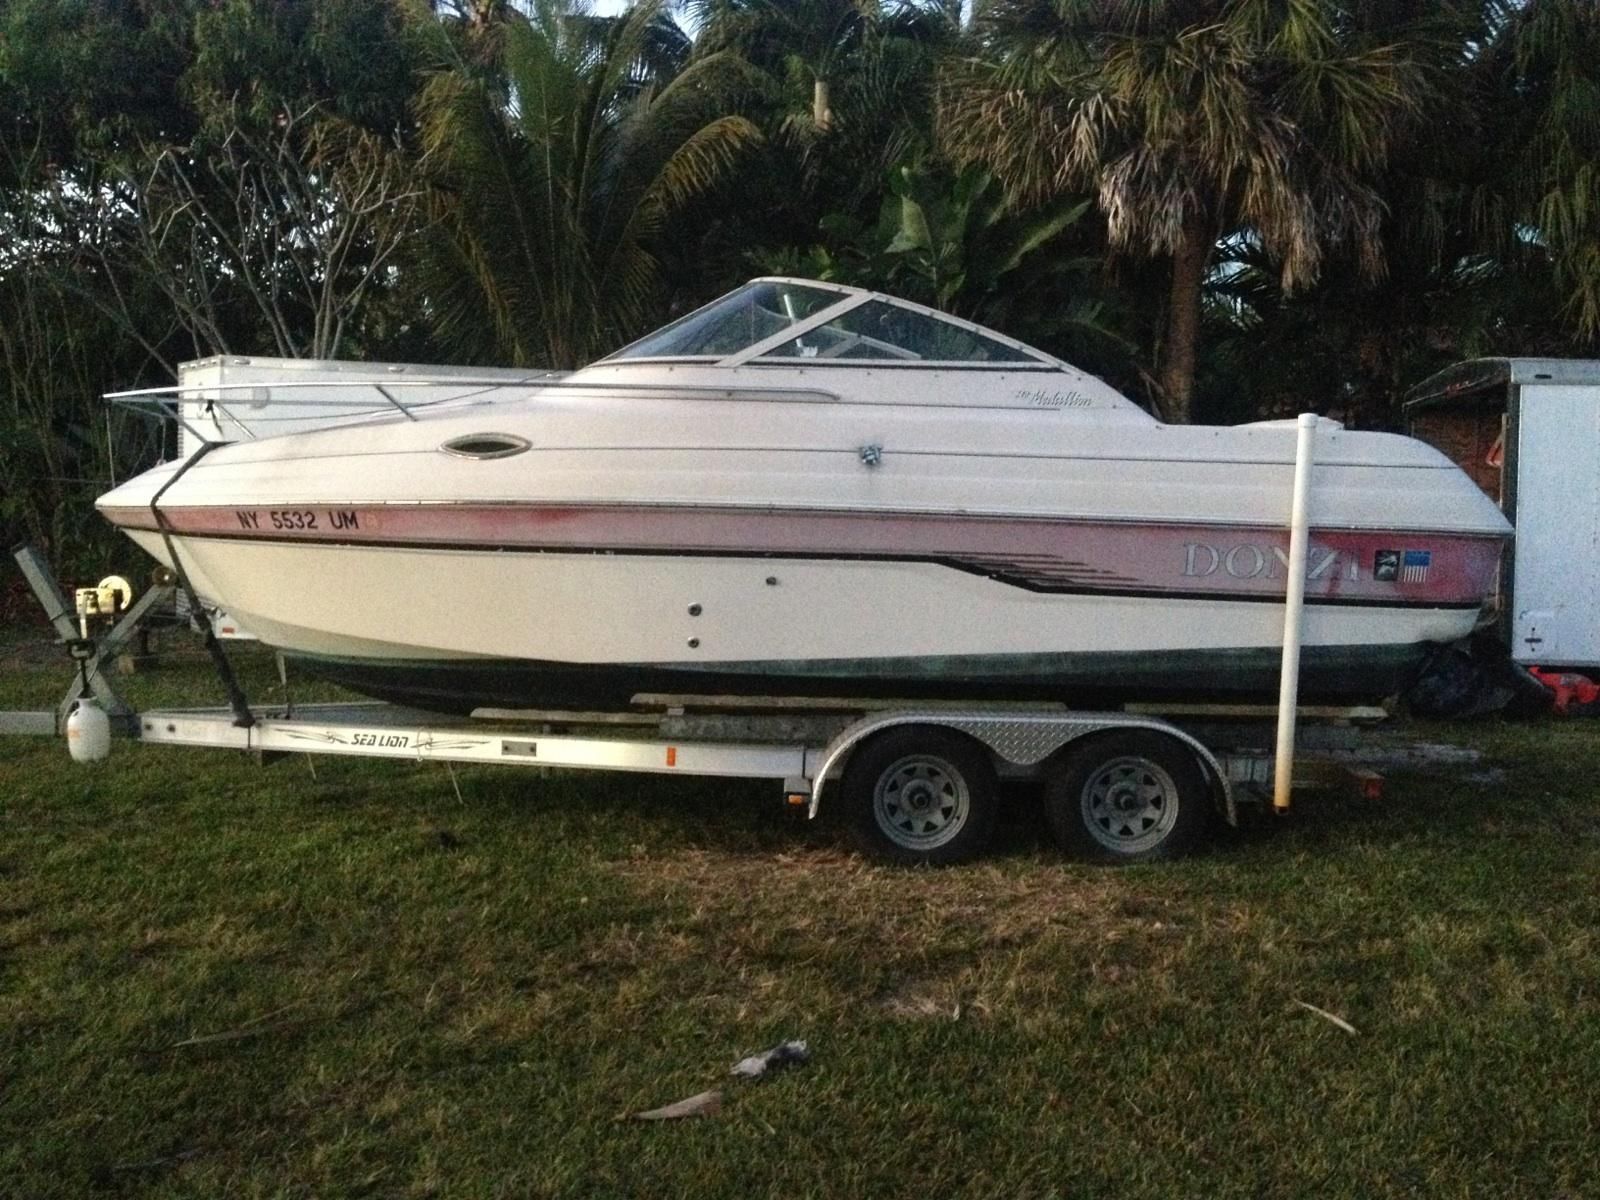 Donzi 210 Medallion 1995 for sale for $4,599.